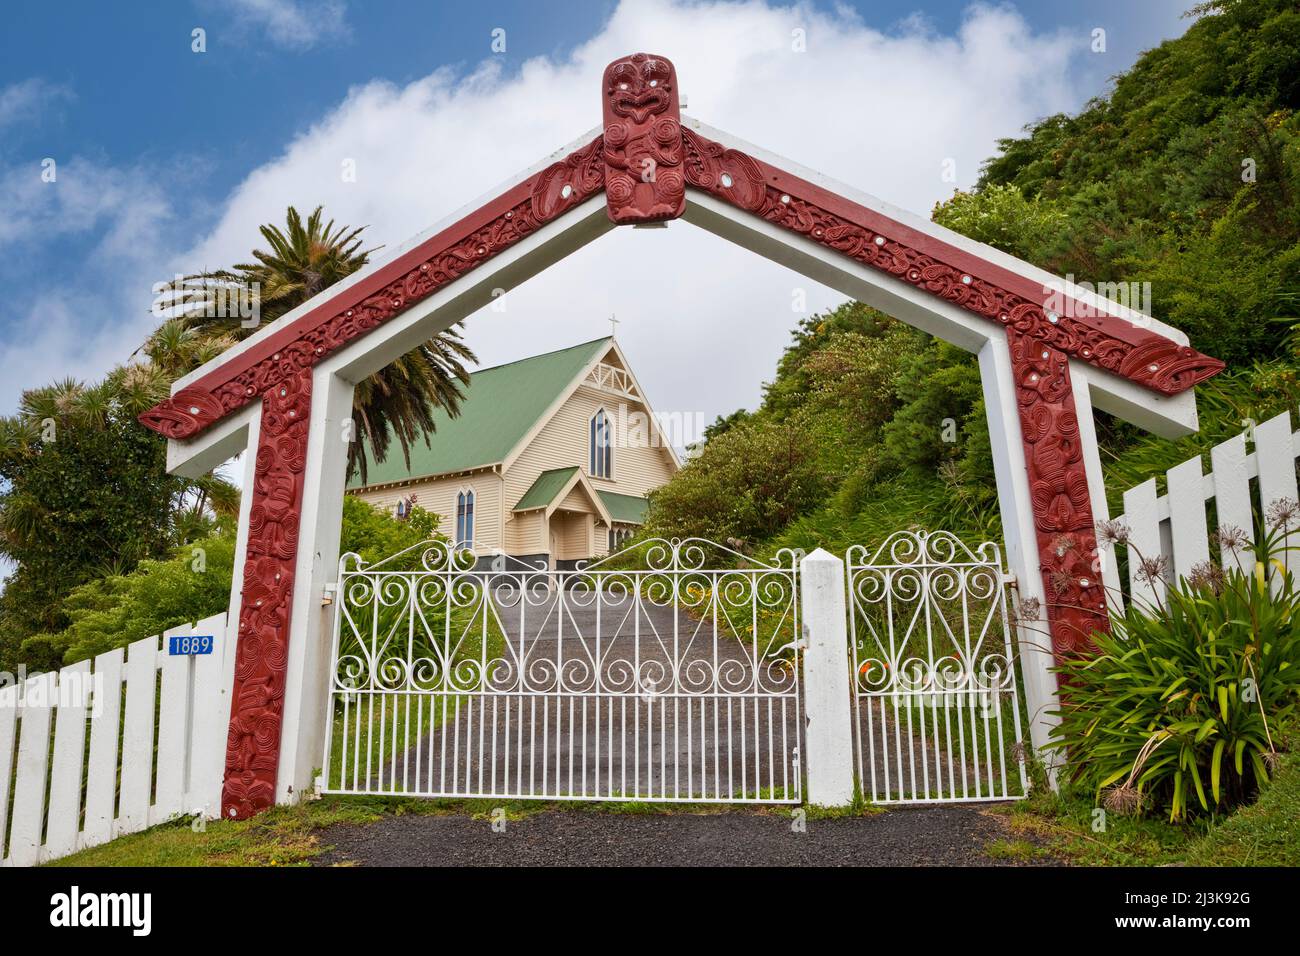 Cultural Syncretism.  Maori Arch in Shape of a Maori Meeting House Welcomes Visitors to St. Mary's Anglican Church, Tikitiki, north island New Zealand Stock Photo